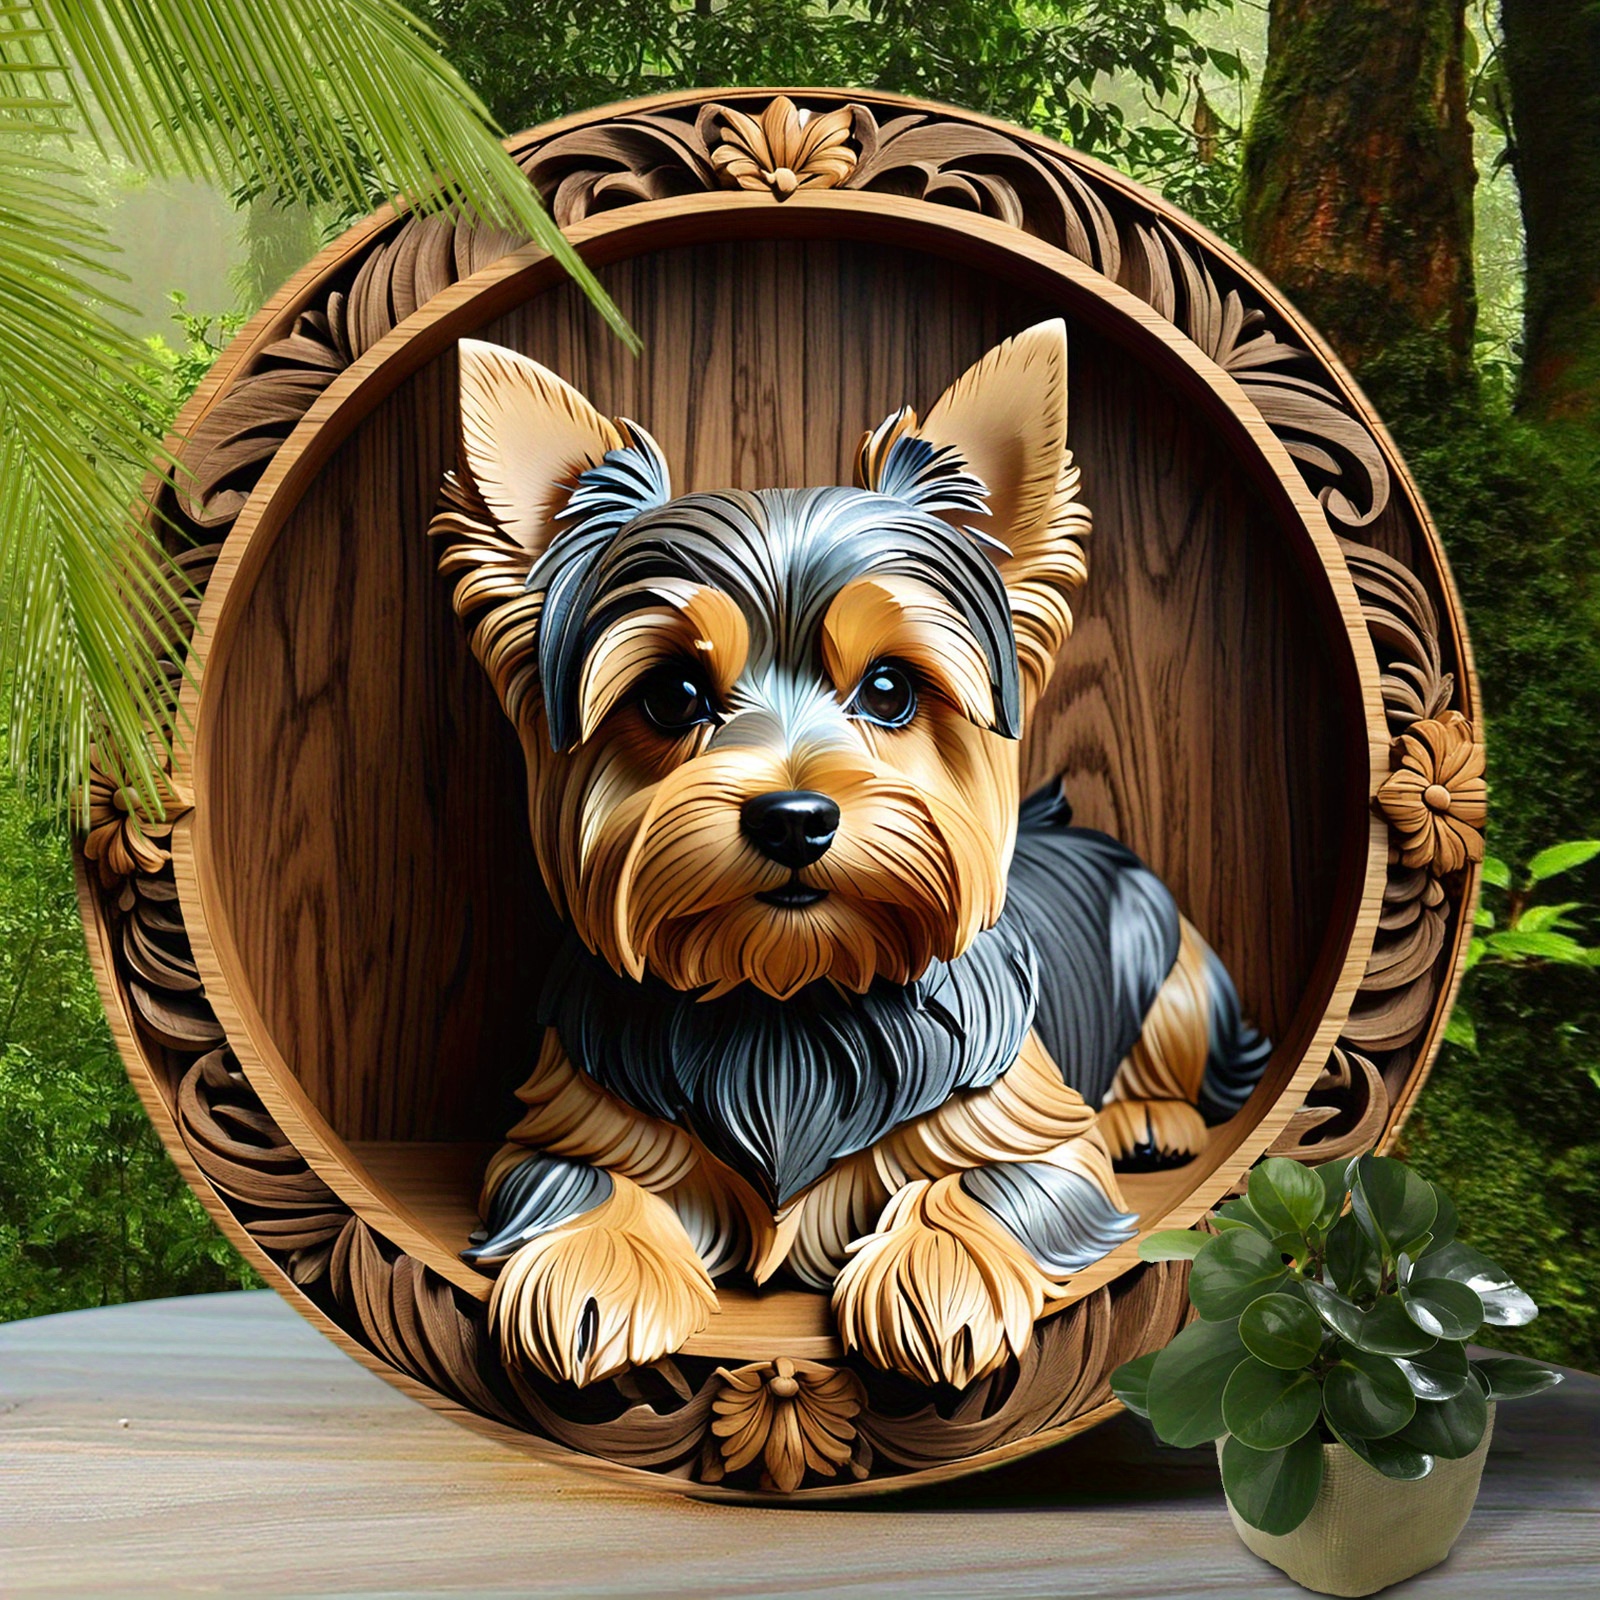 

1pc, Yorkshire Terrier Sign - Cute Dog Aluminum Sign, Suitable For Home Room Cafe Bedroom Bar Living Room Garage Wall Decoration, Round Fashion Art Aesthetic, Holiday Gift 8x8 Inch (20x20cm)